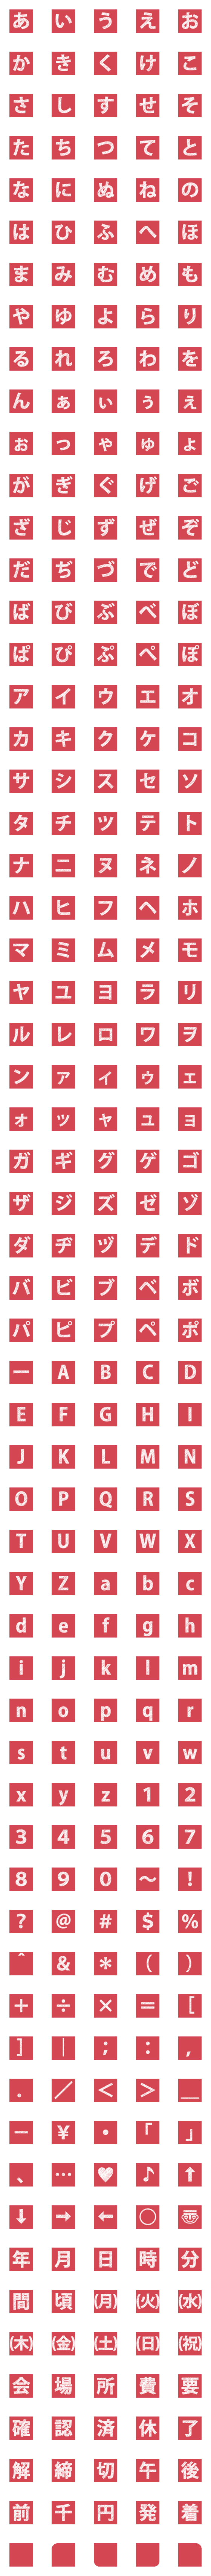 [LINE絵文字]手書き風連結BLOCK【かな英数字絵文字】の画像一覧